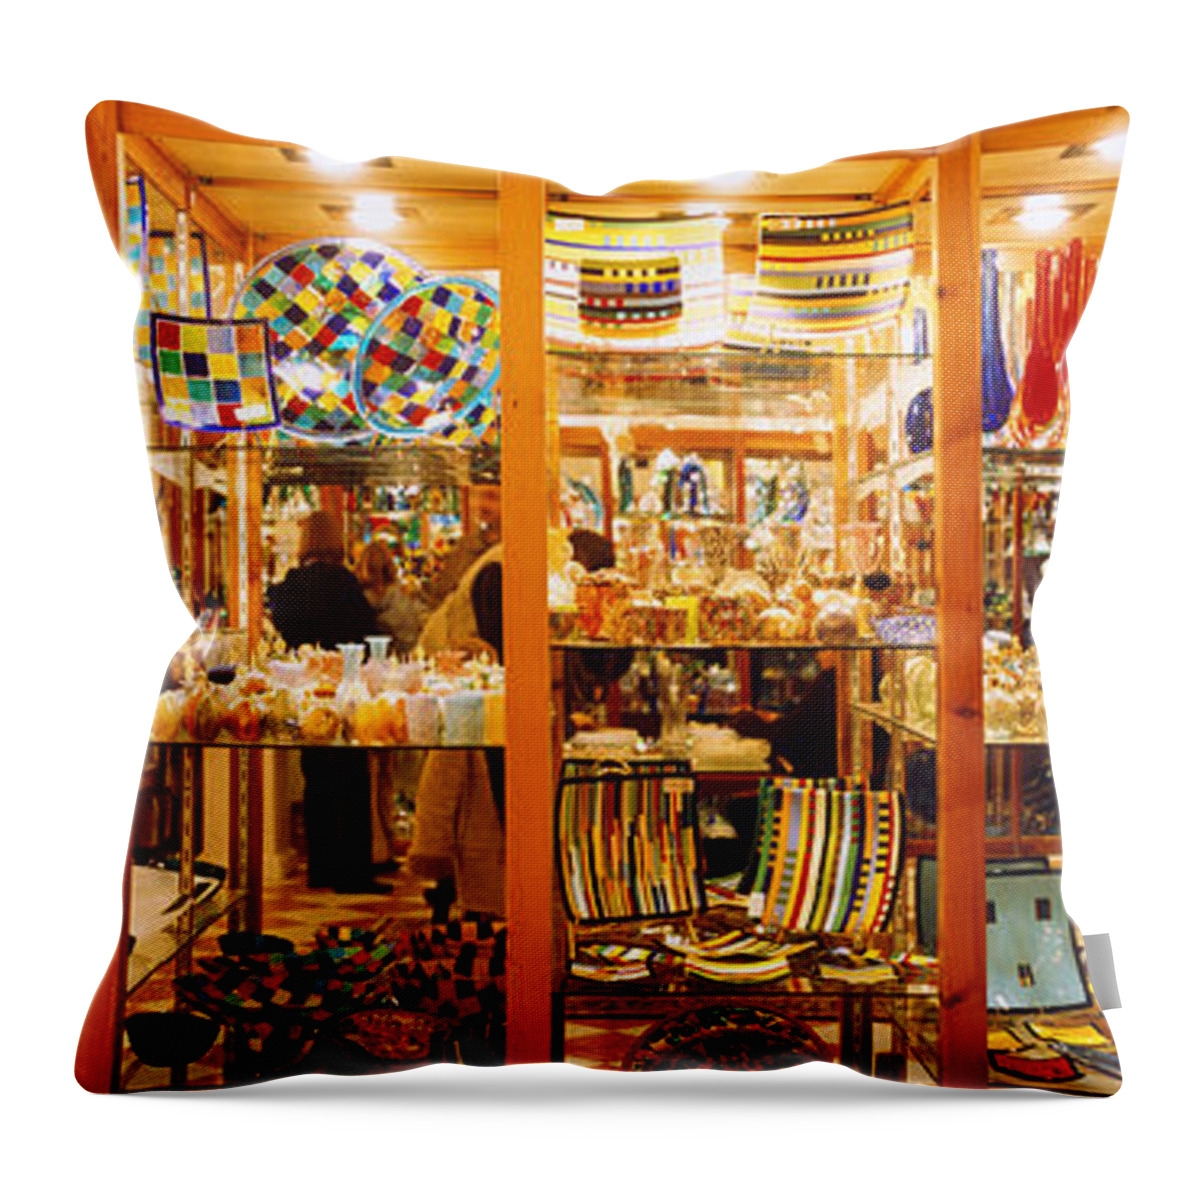 Photography Throw Pillow featuring the photograph Glassworks Display In A Store, Murano by Panoramic Images